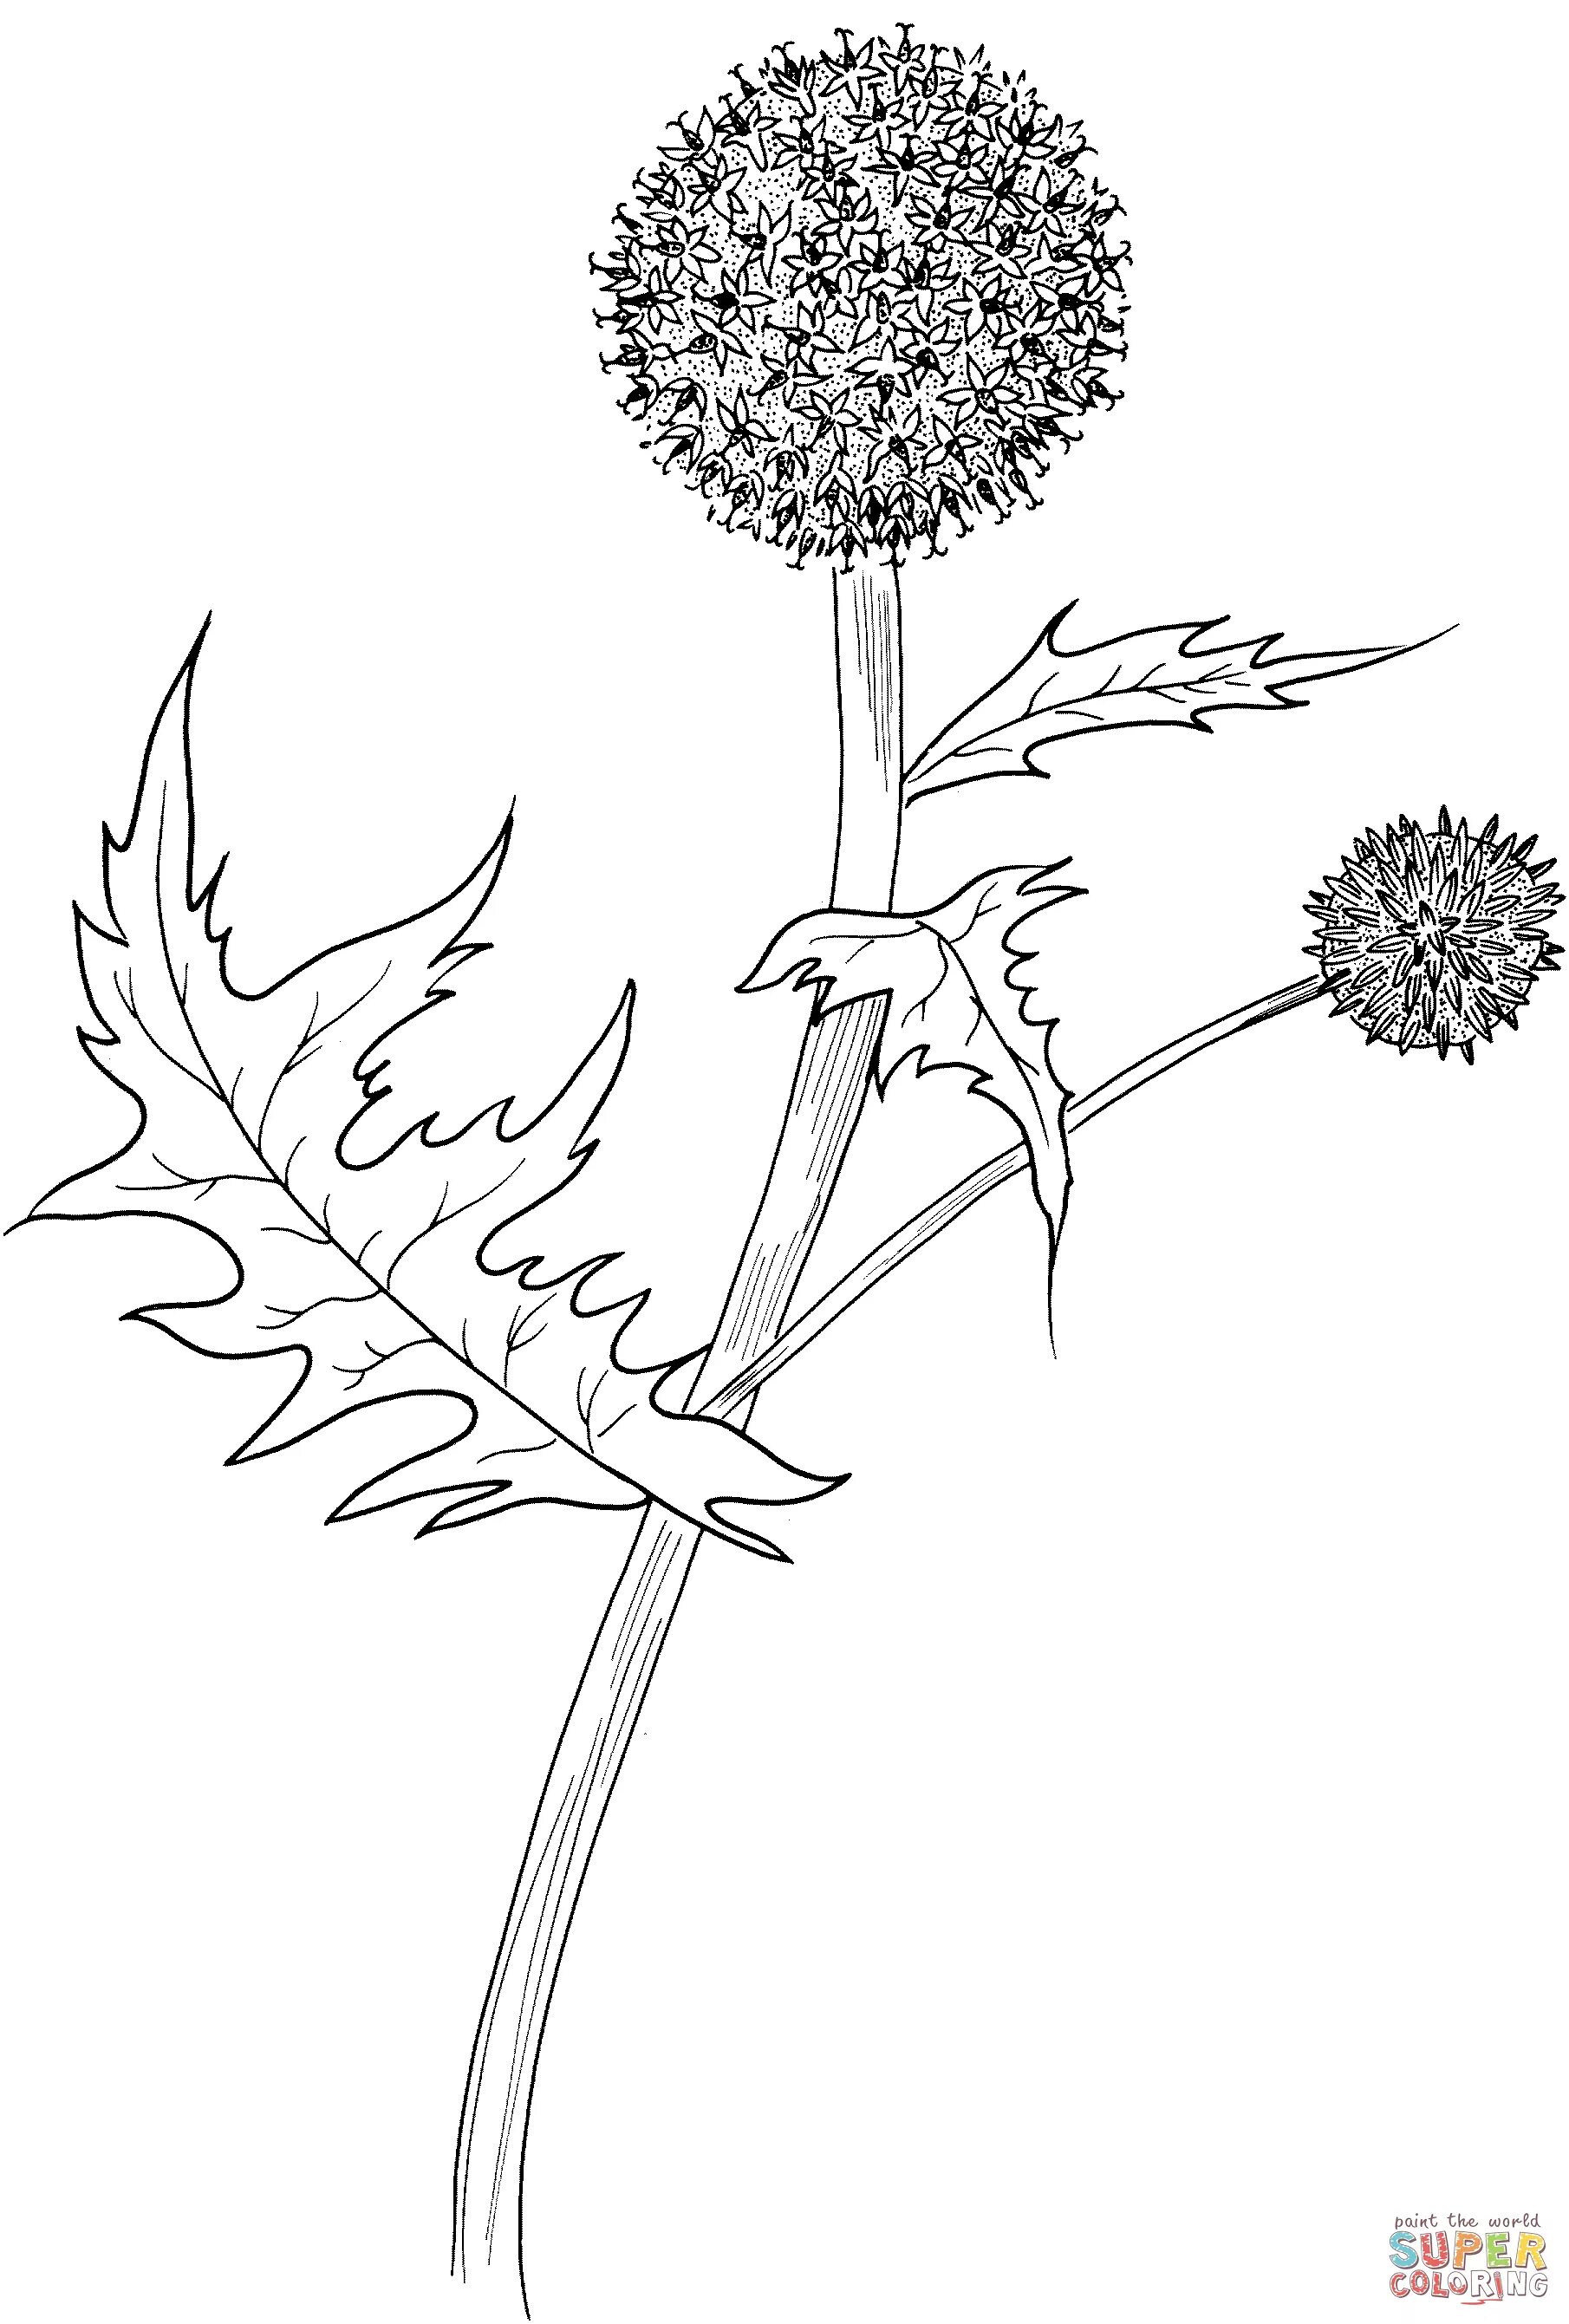 Non-traditional thistle coloring